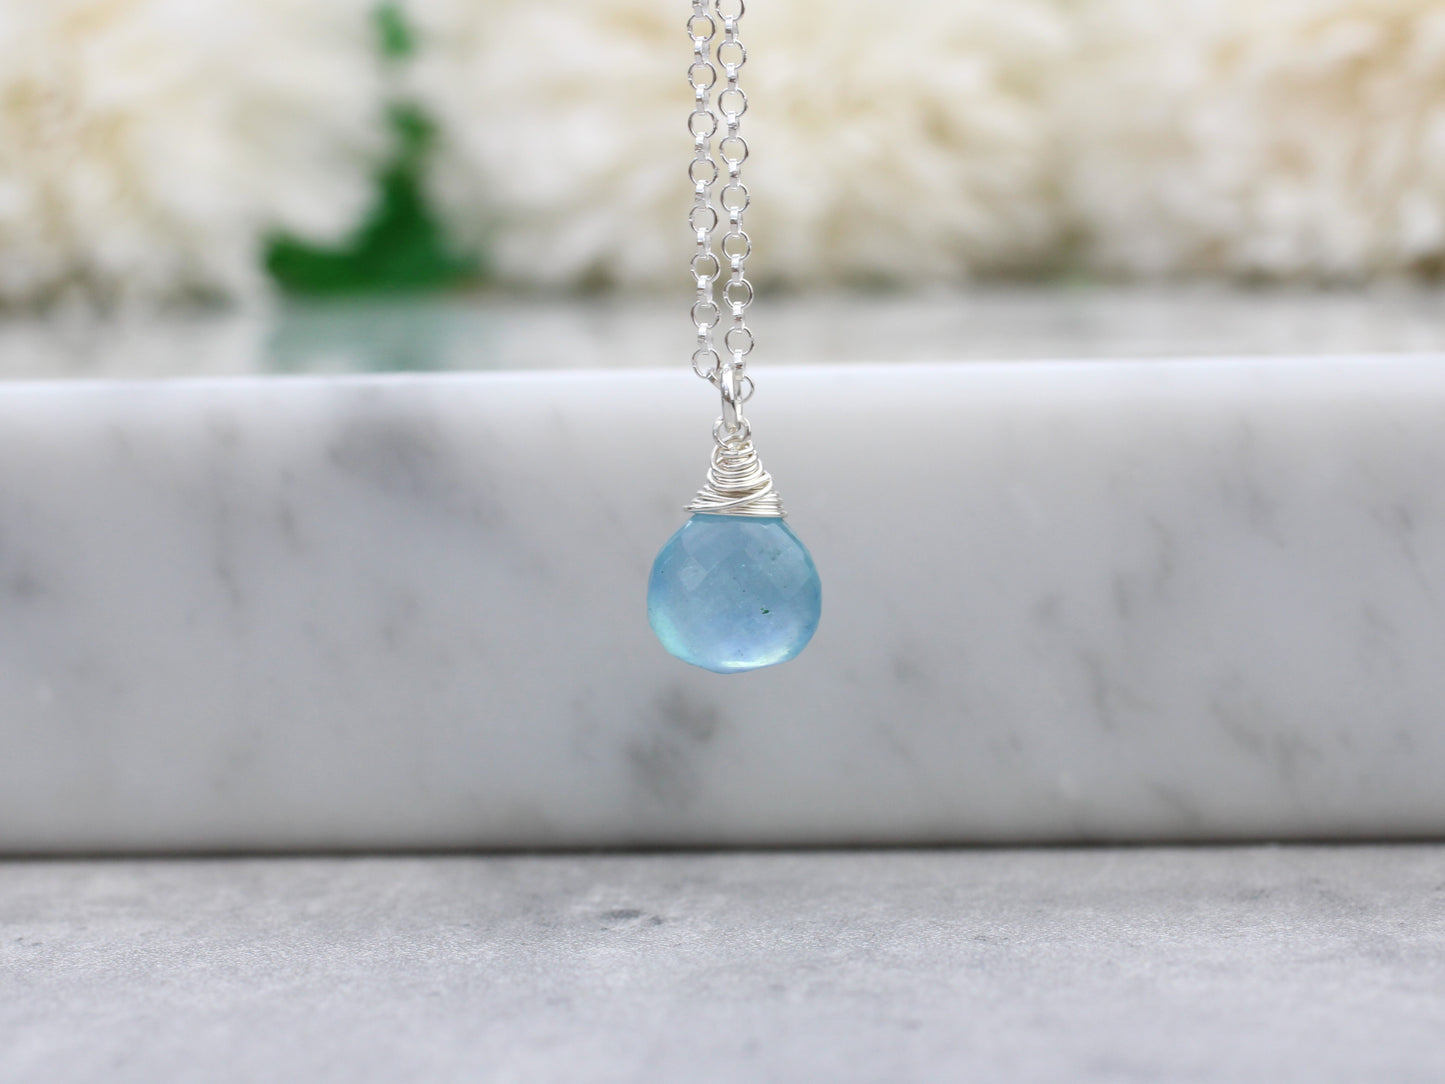 Aquamarine necklace in silver or gold.